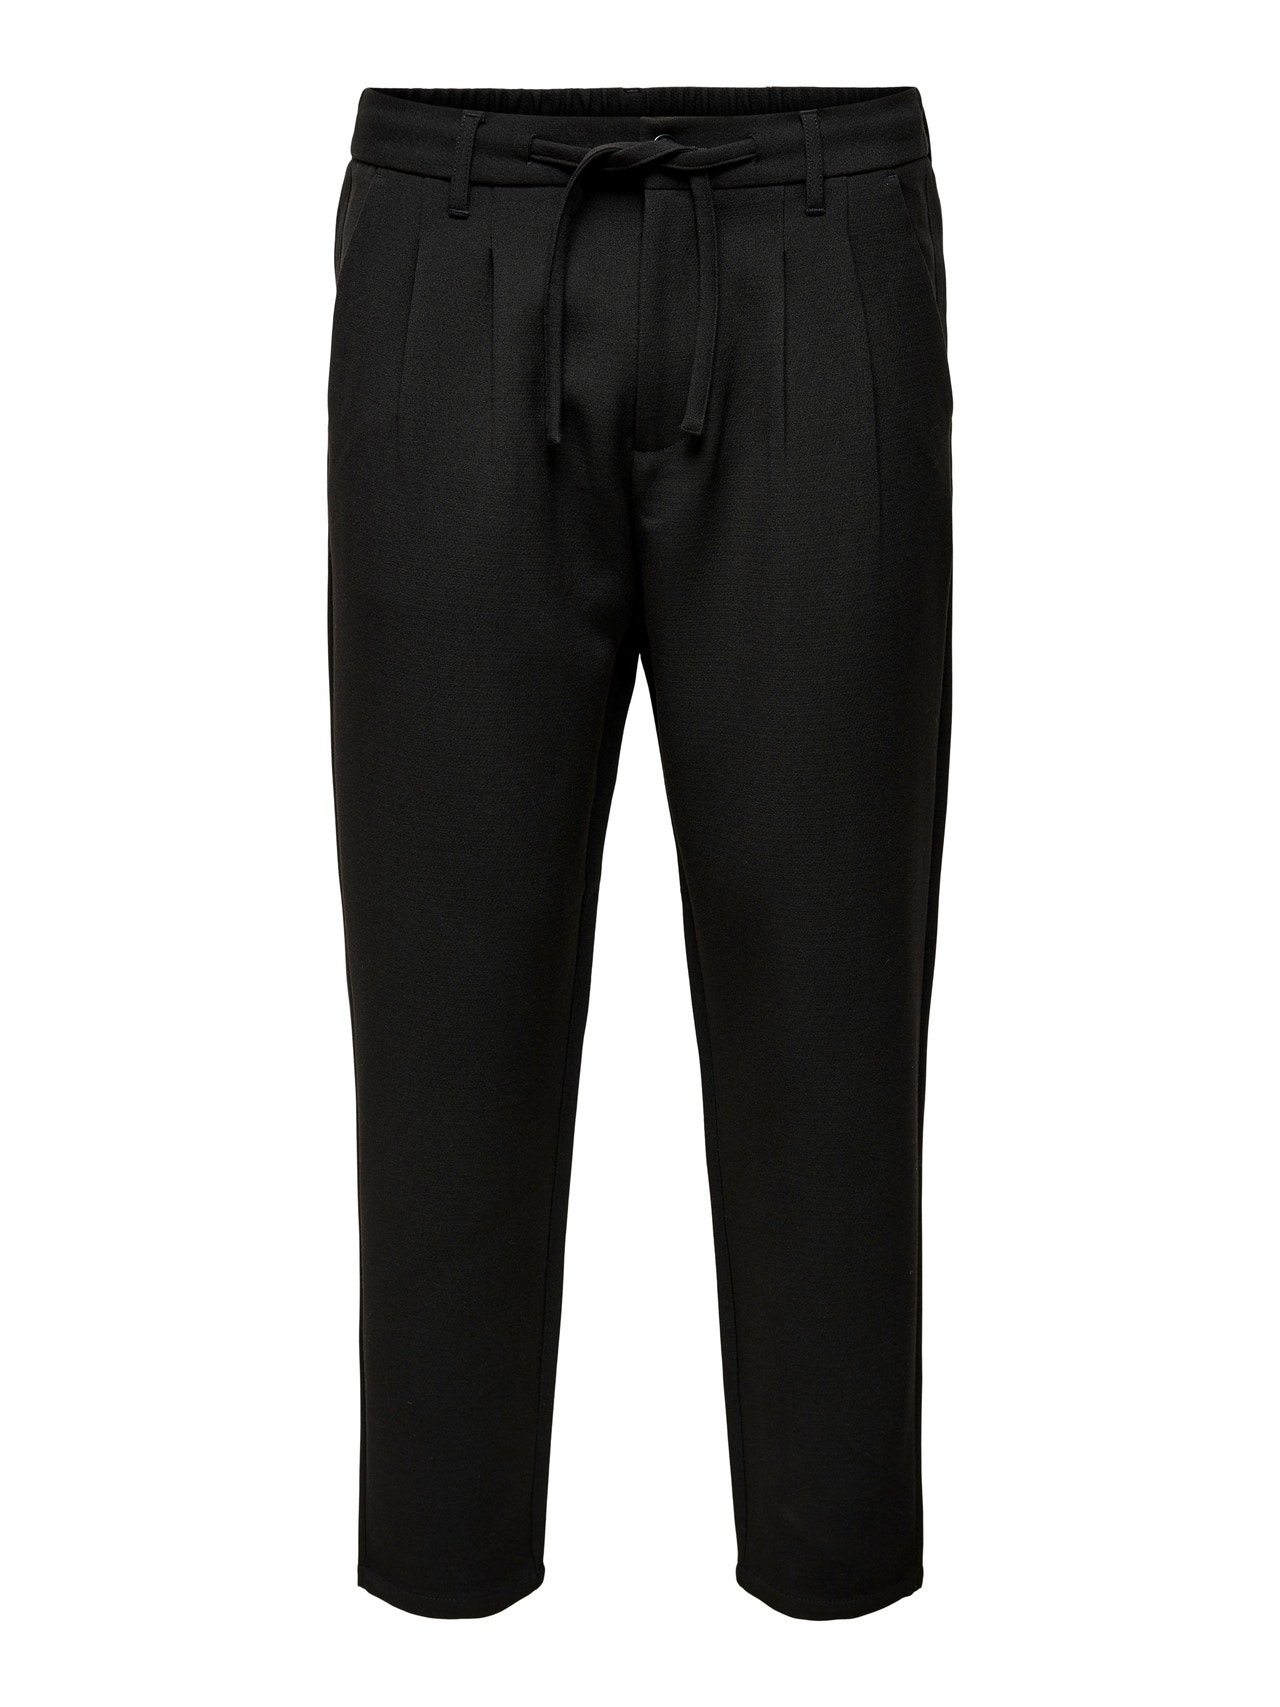 ONLY & SONS Classic chino trousers -Black - 22022907